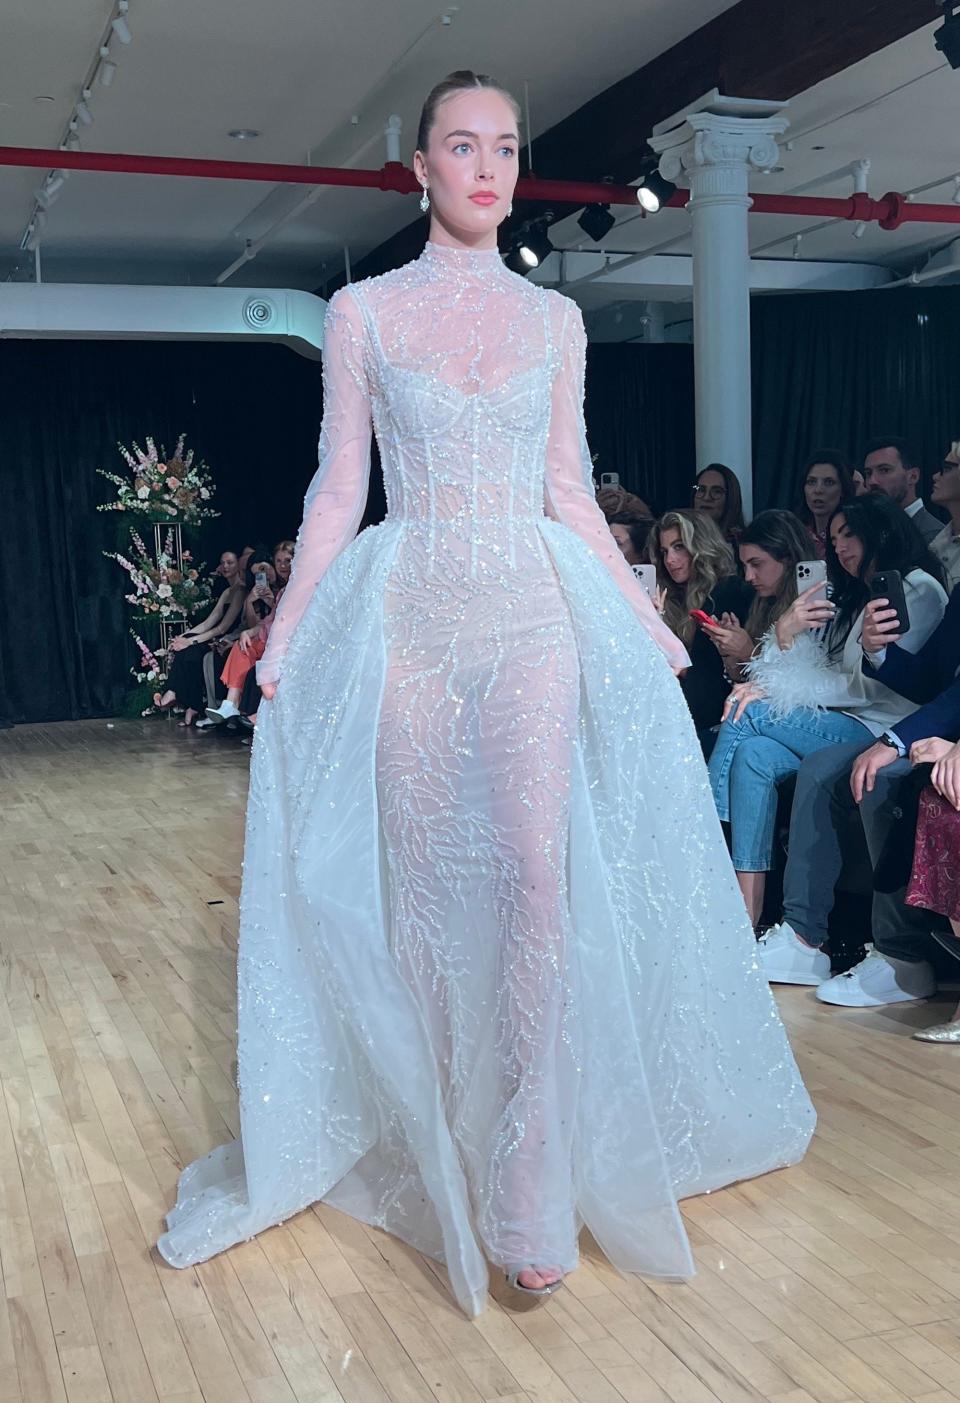 A woman walks in a sheer, sparkly wedding dress.